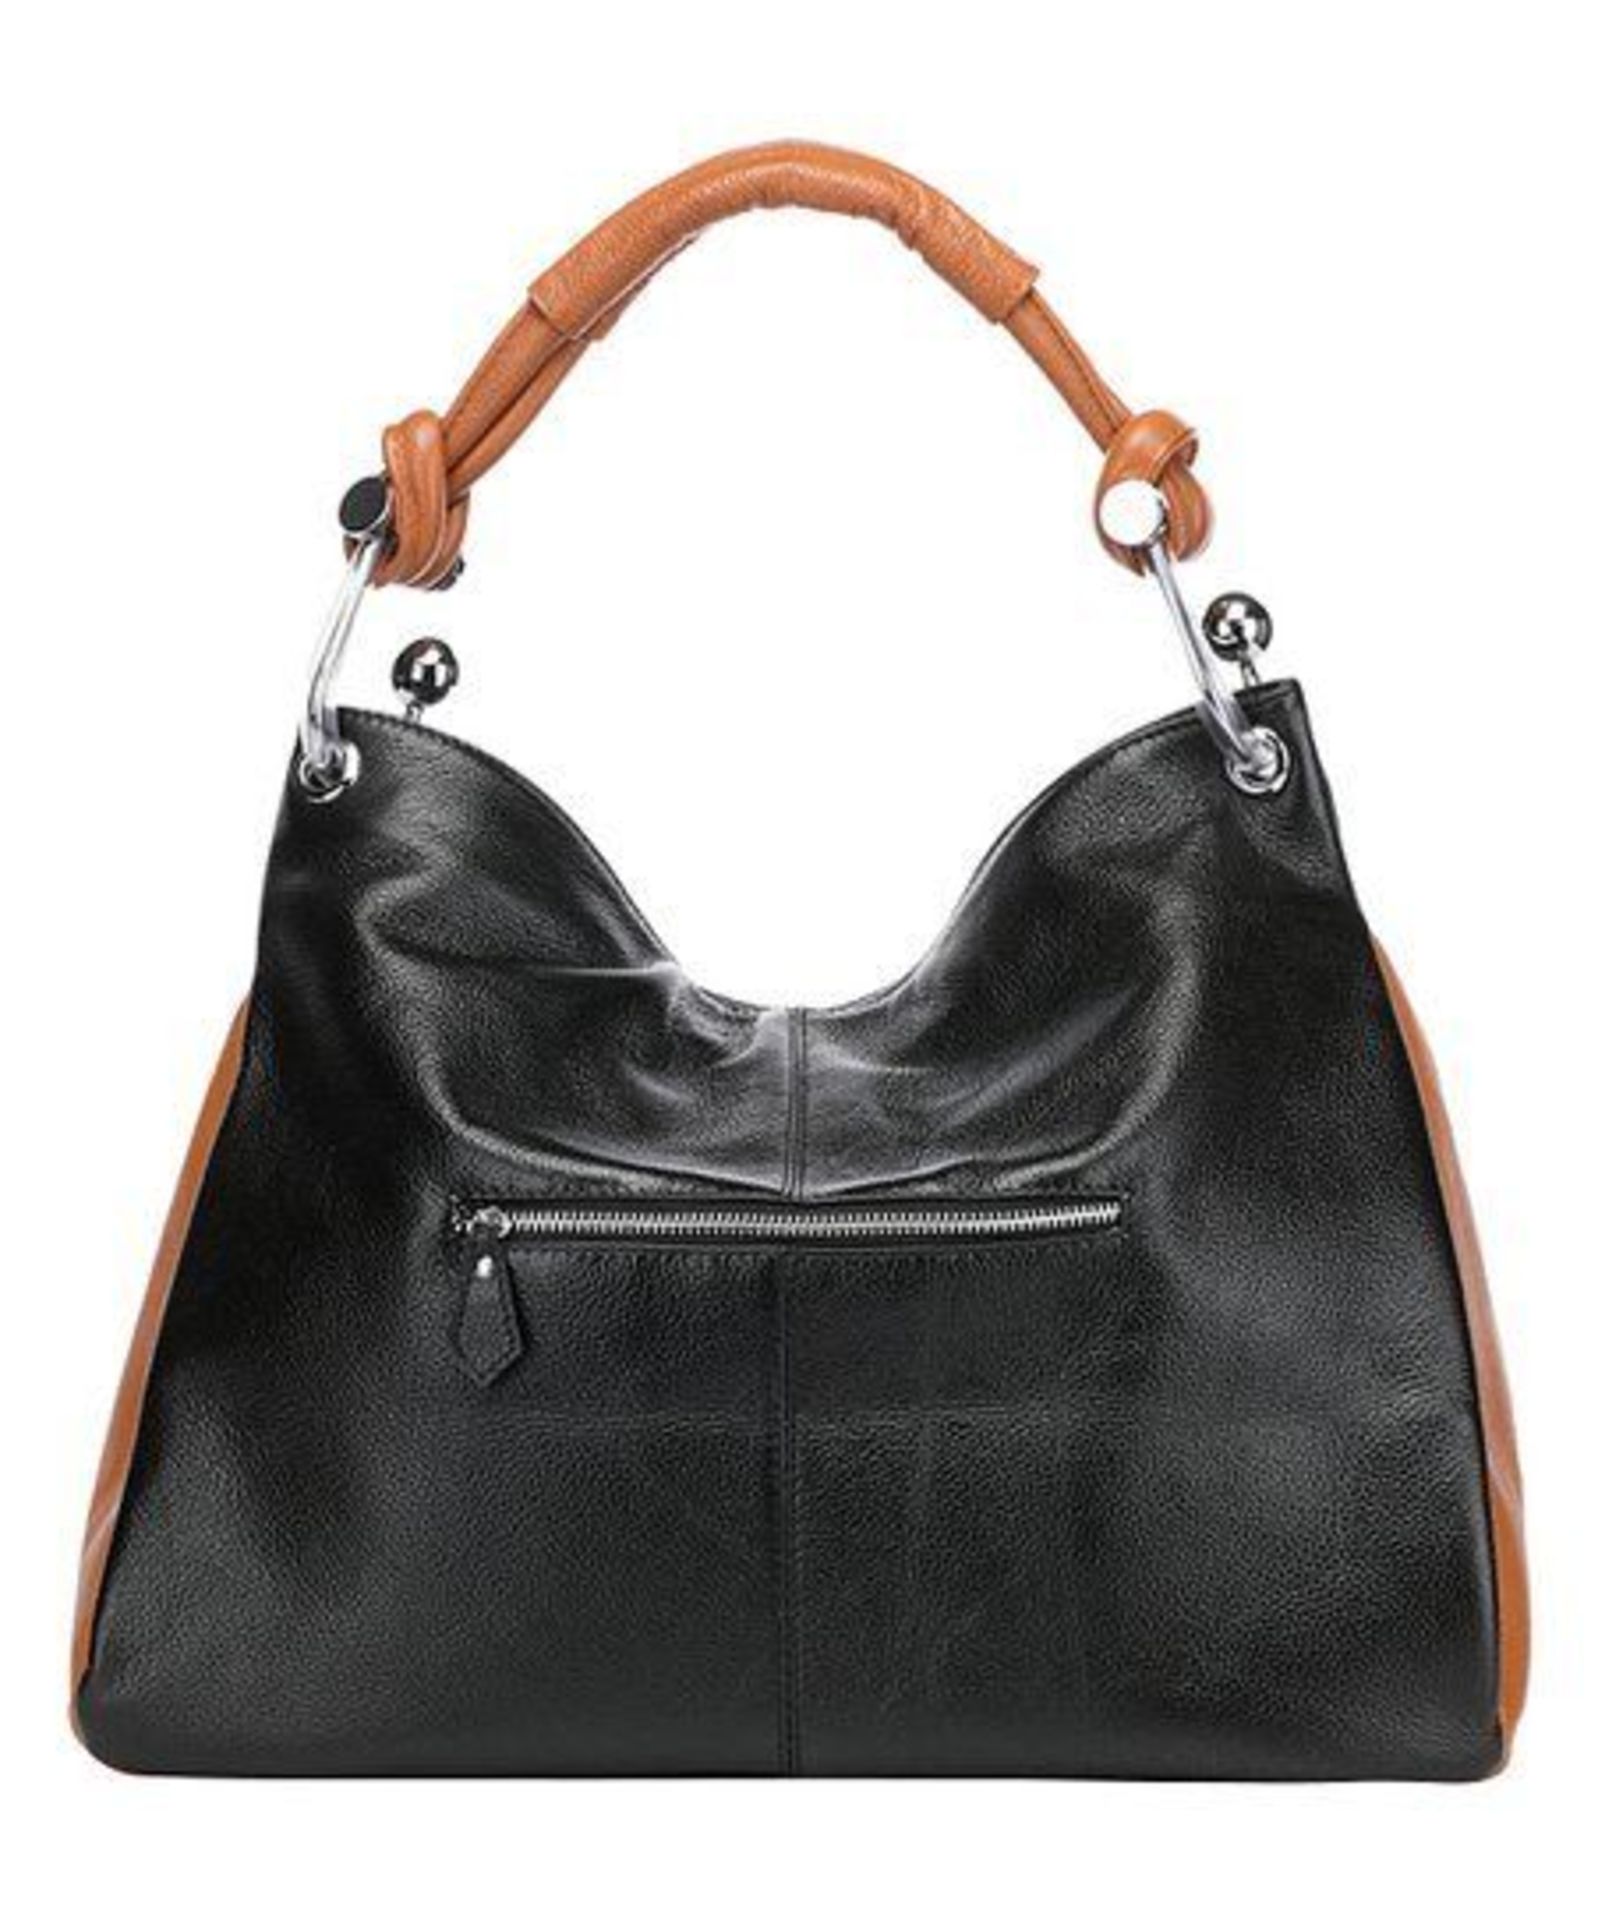 Vicenzo Leather Black & Brown Melissa Leather Hobo (New With Tags) [Ref: 34095420-Tf-Tub 1-Tf] - Image 3 of 3